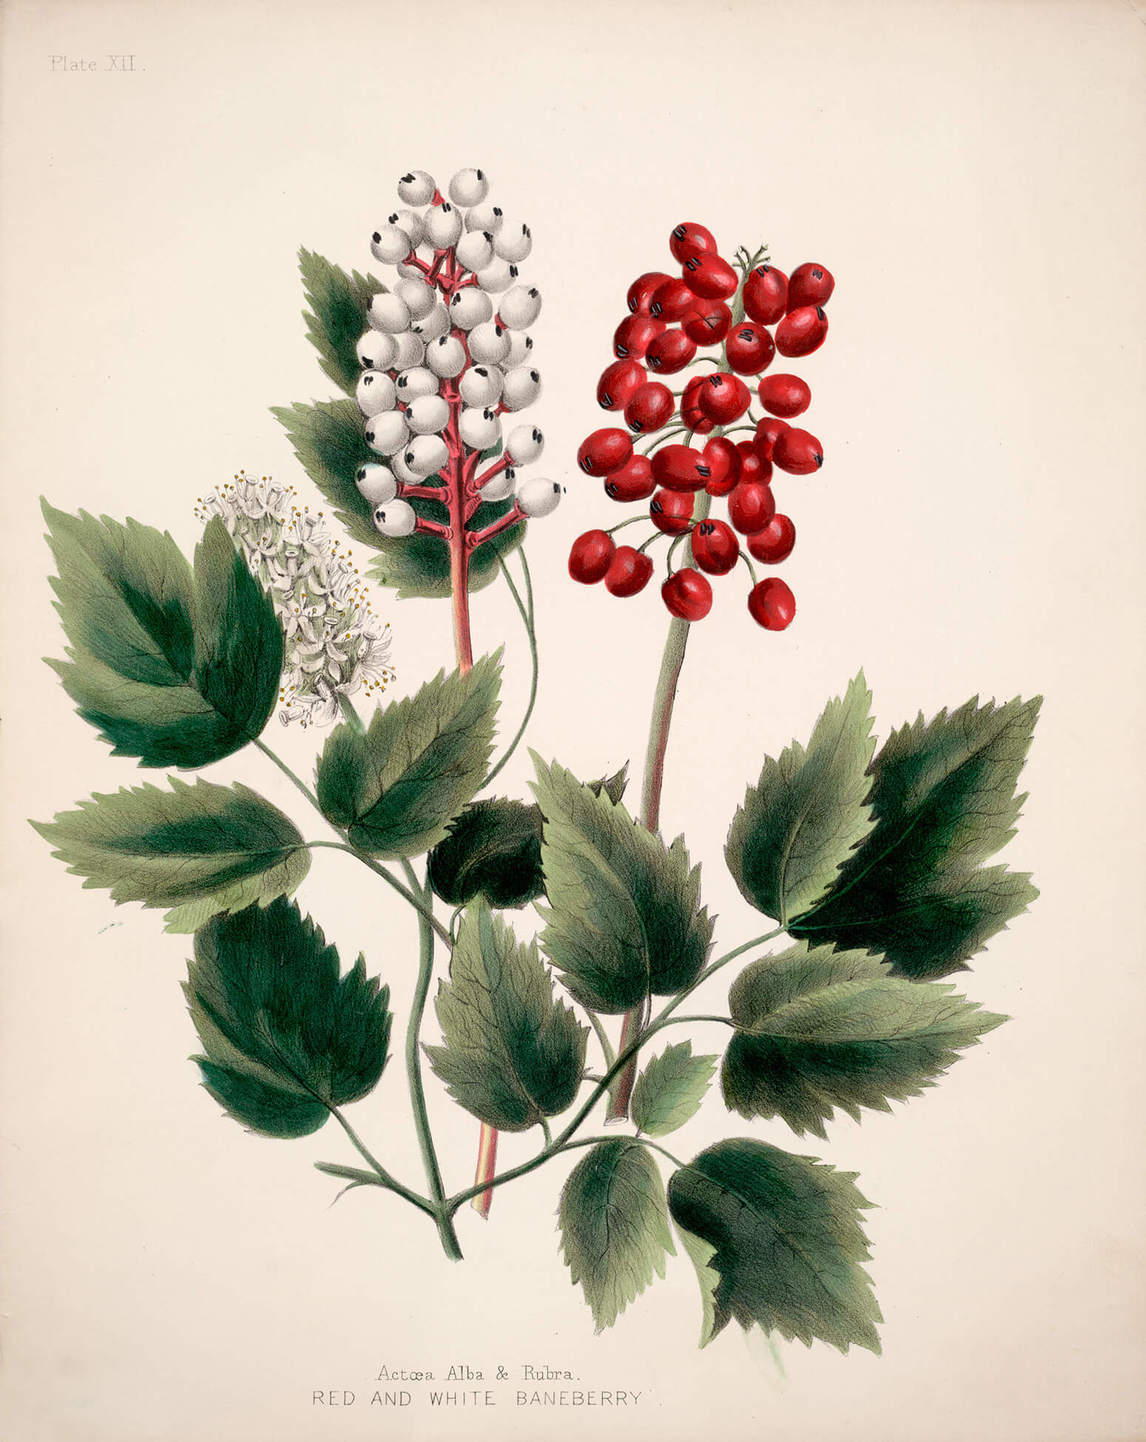 Actoea Alba & Rubra, Red and White Baneberry, 1853, by Maria Frances Ann Morris Miller